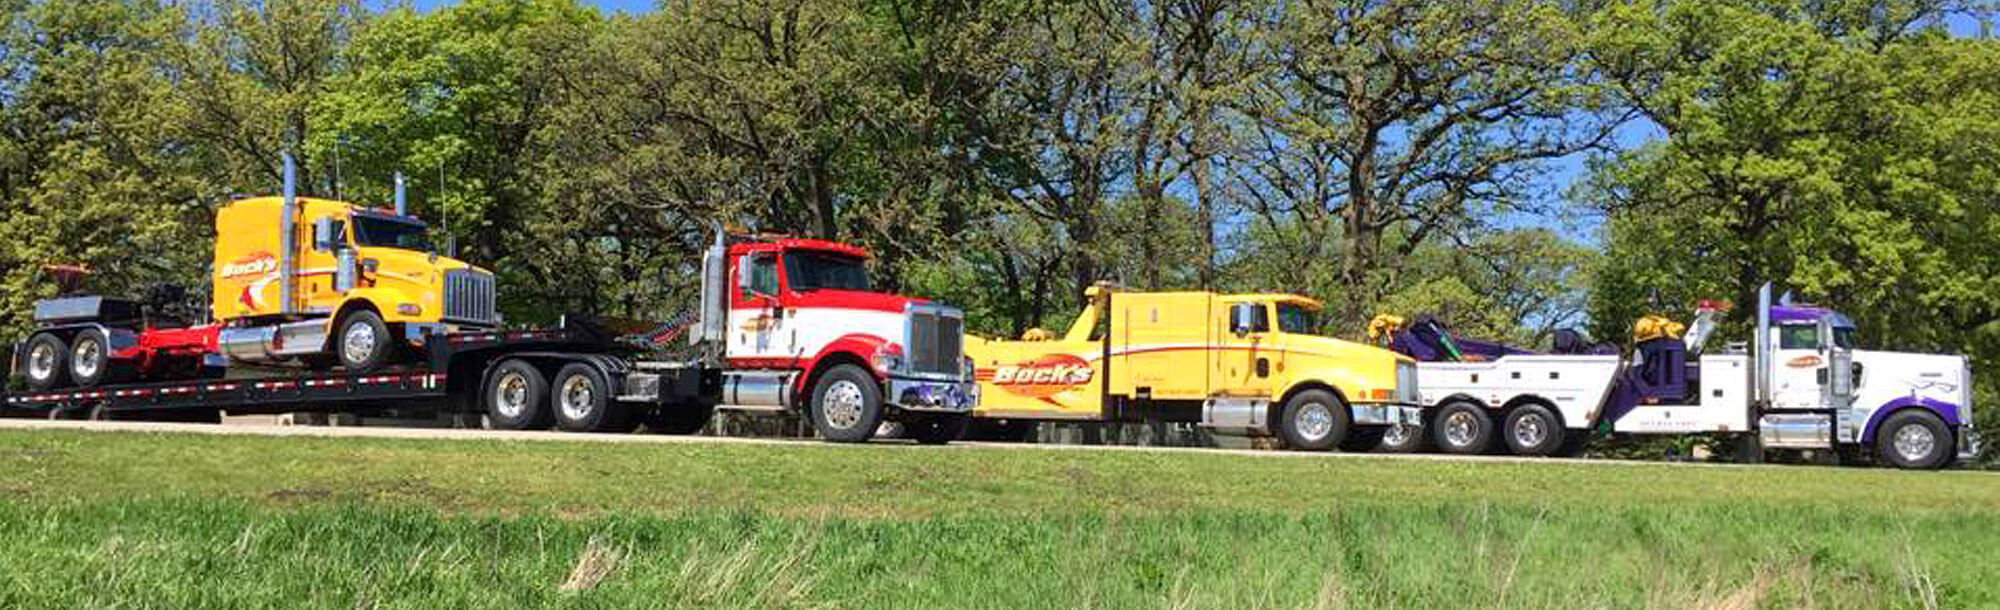 Row of Bock's Service tow trucks along the side of the road